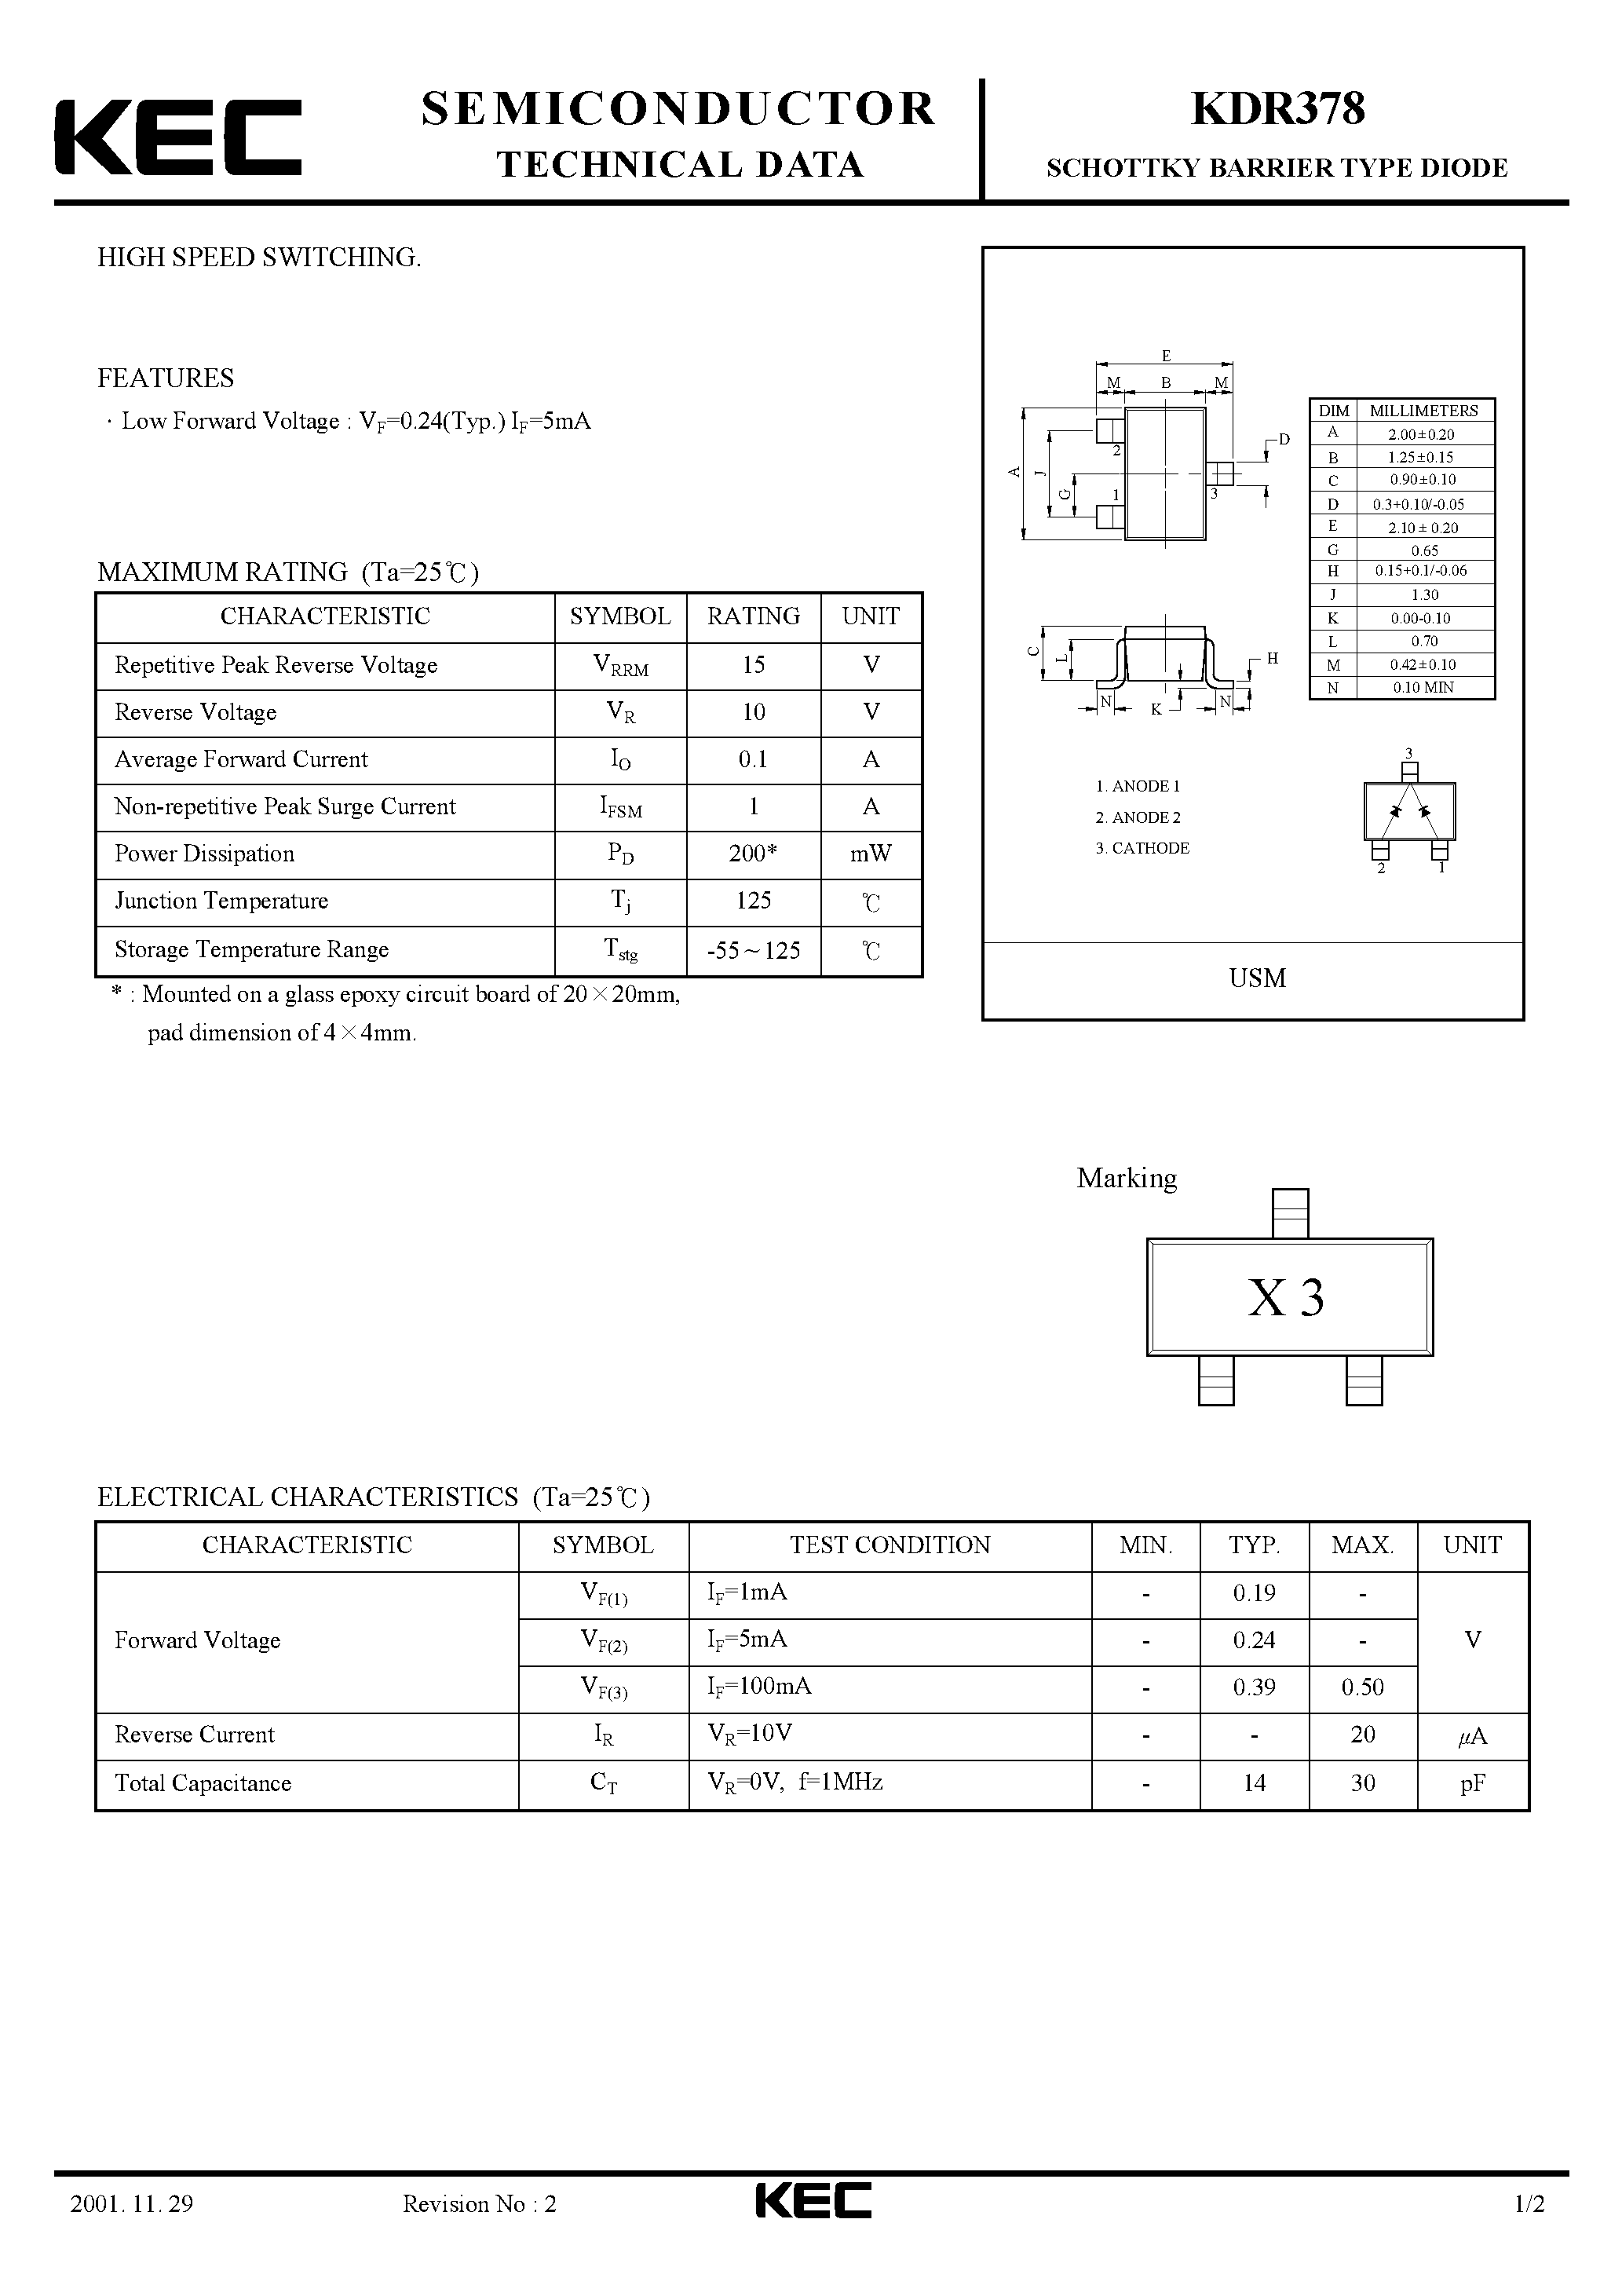 Datasheet KDR378 - SCHOTTKY BARRIER TYPE DIODE(HIGH SPEED SWITCHING) page 1